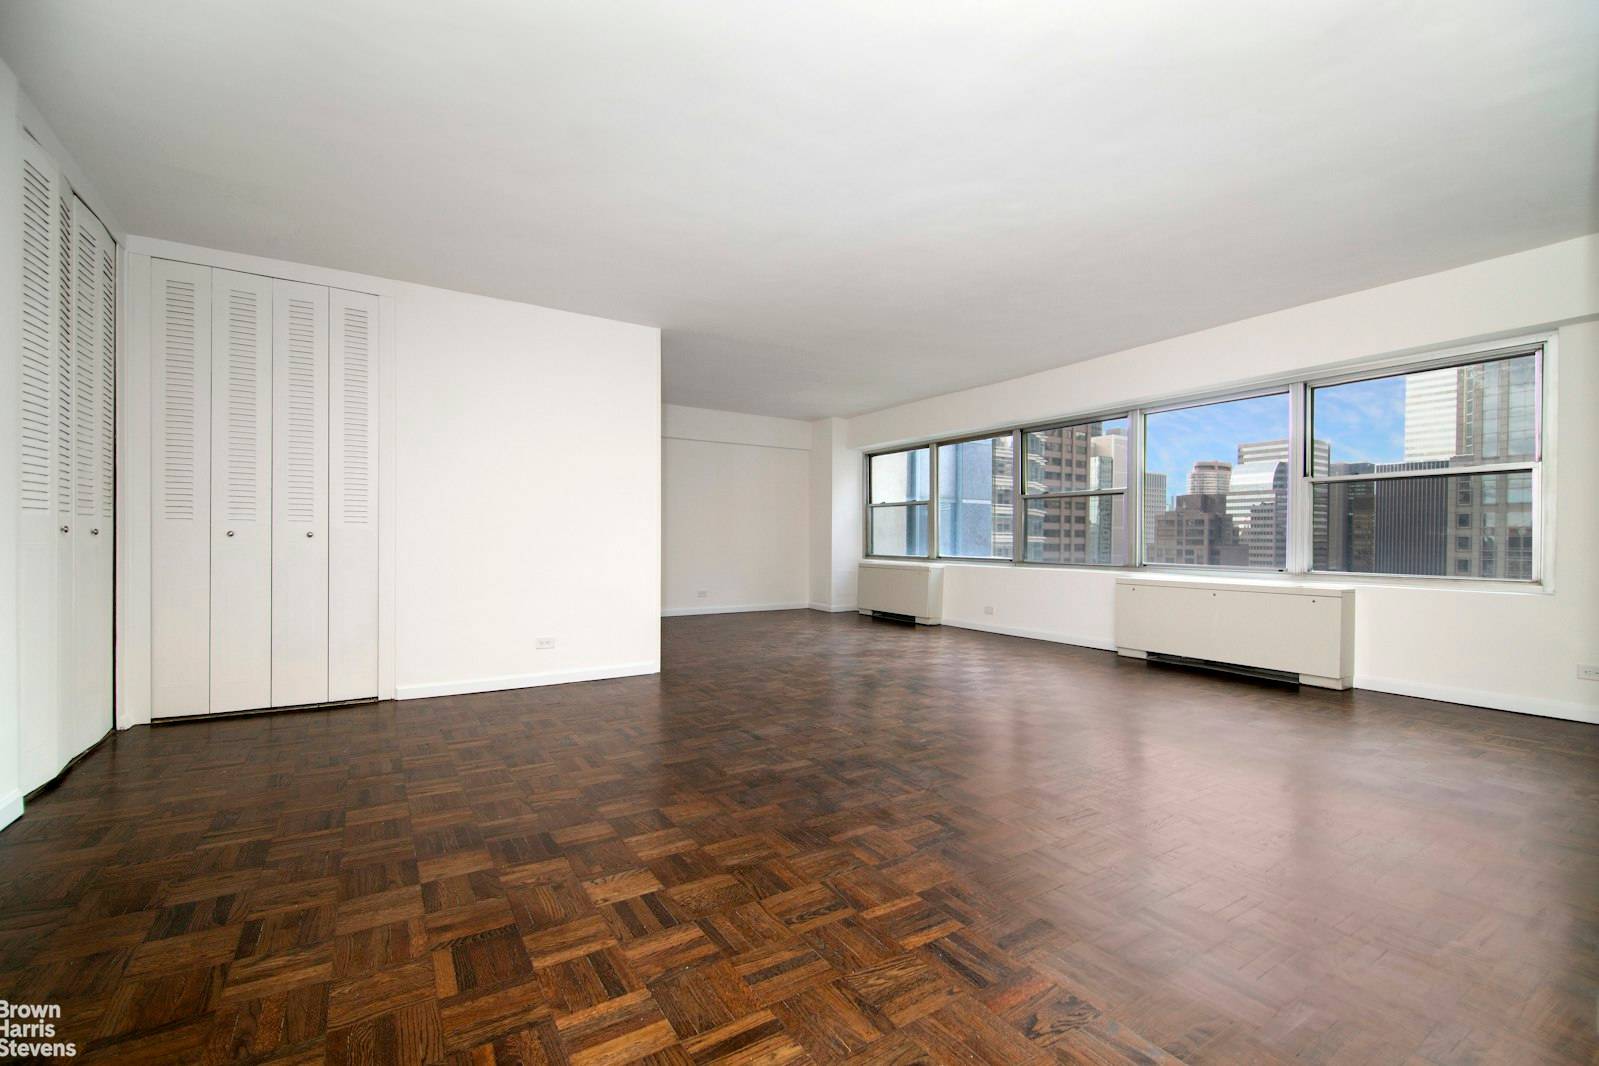 Be still my heart. This super spacious sunfilled Junior one bedroom is larger than most full sized one bedrooms and has spectacular open southern city views that will knock your ...